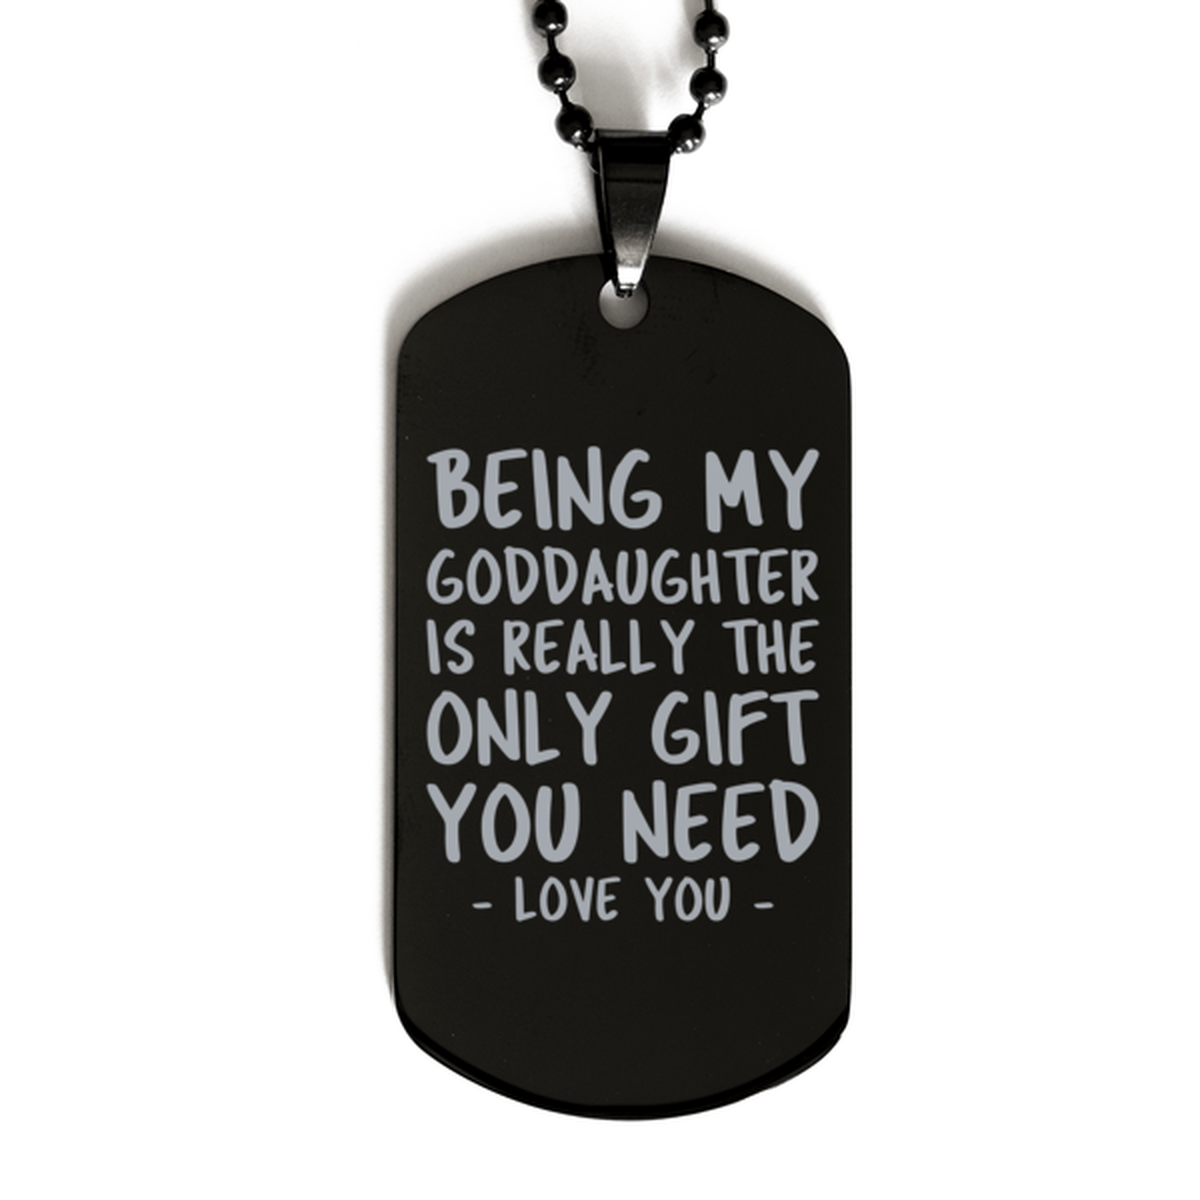 Funny Goddaughter Black Dog Tag Necklace, Being My Goddaughter Is Really the Only Gift You Need, Best Birthday Gifts for Goddaughter